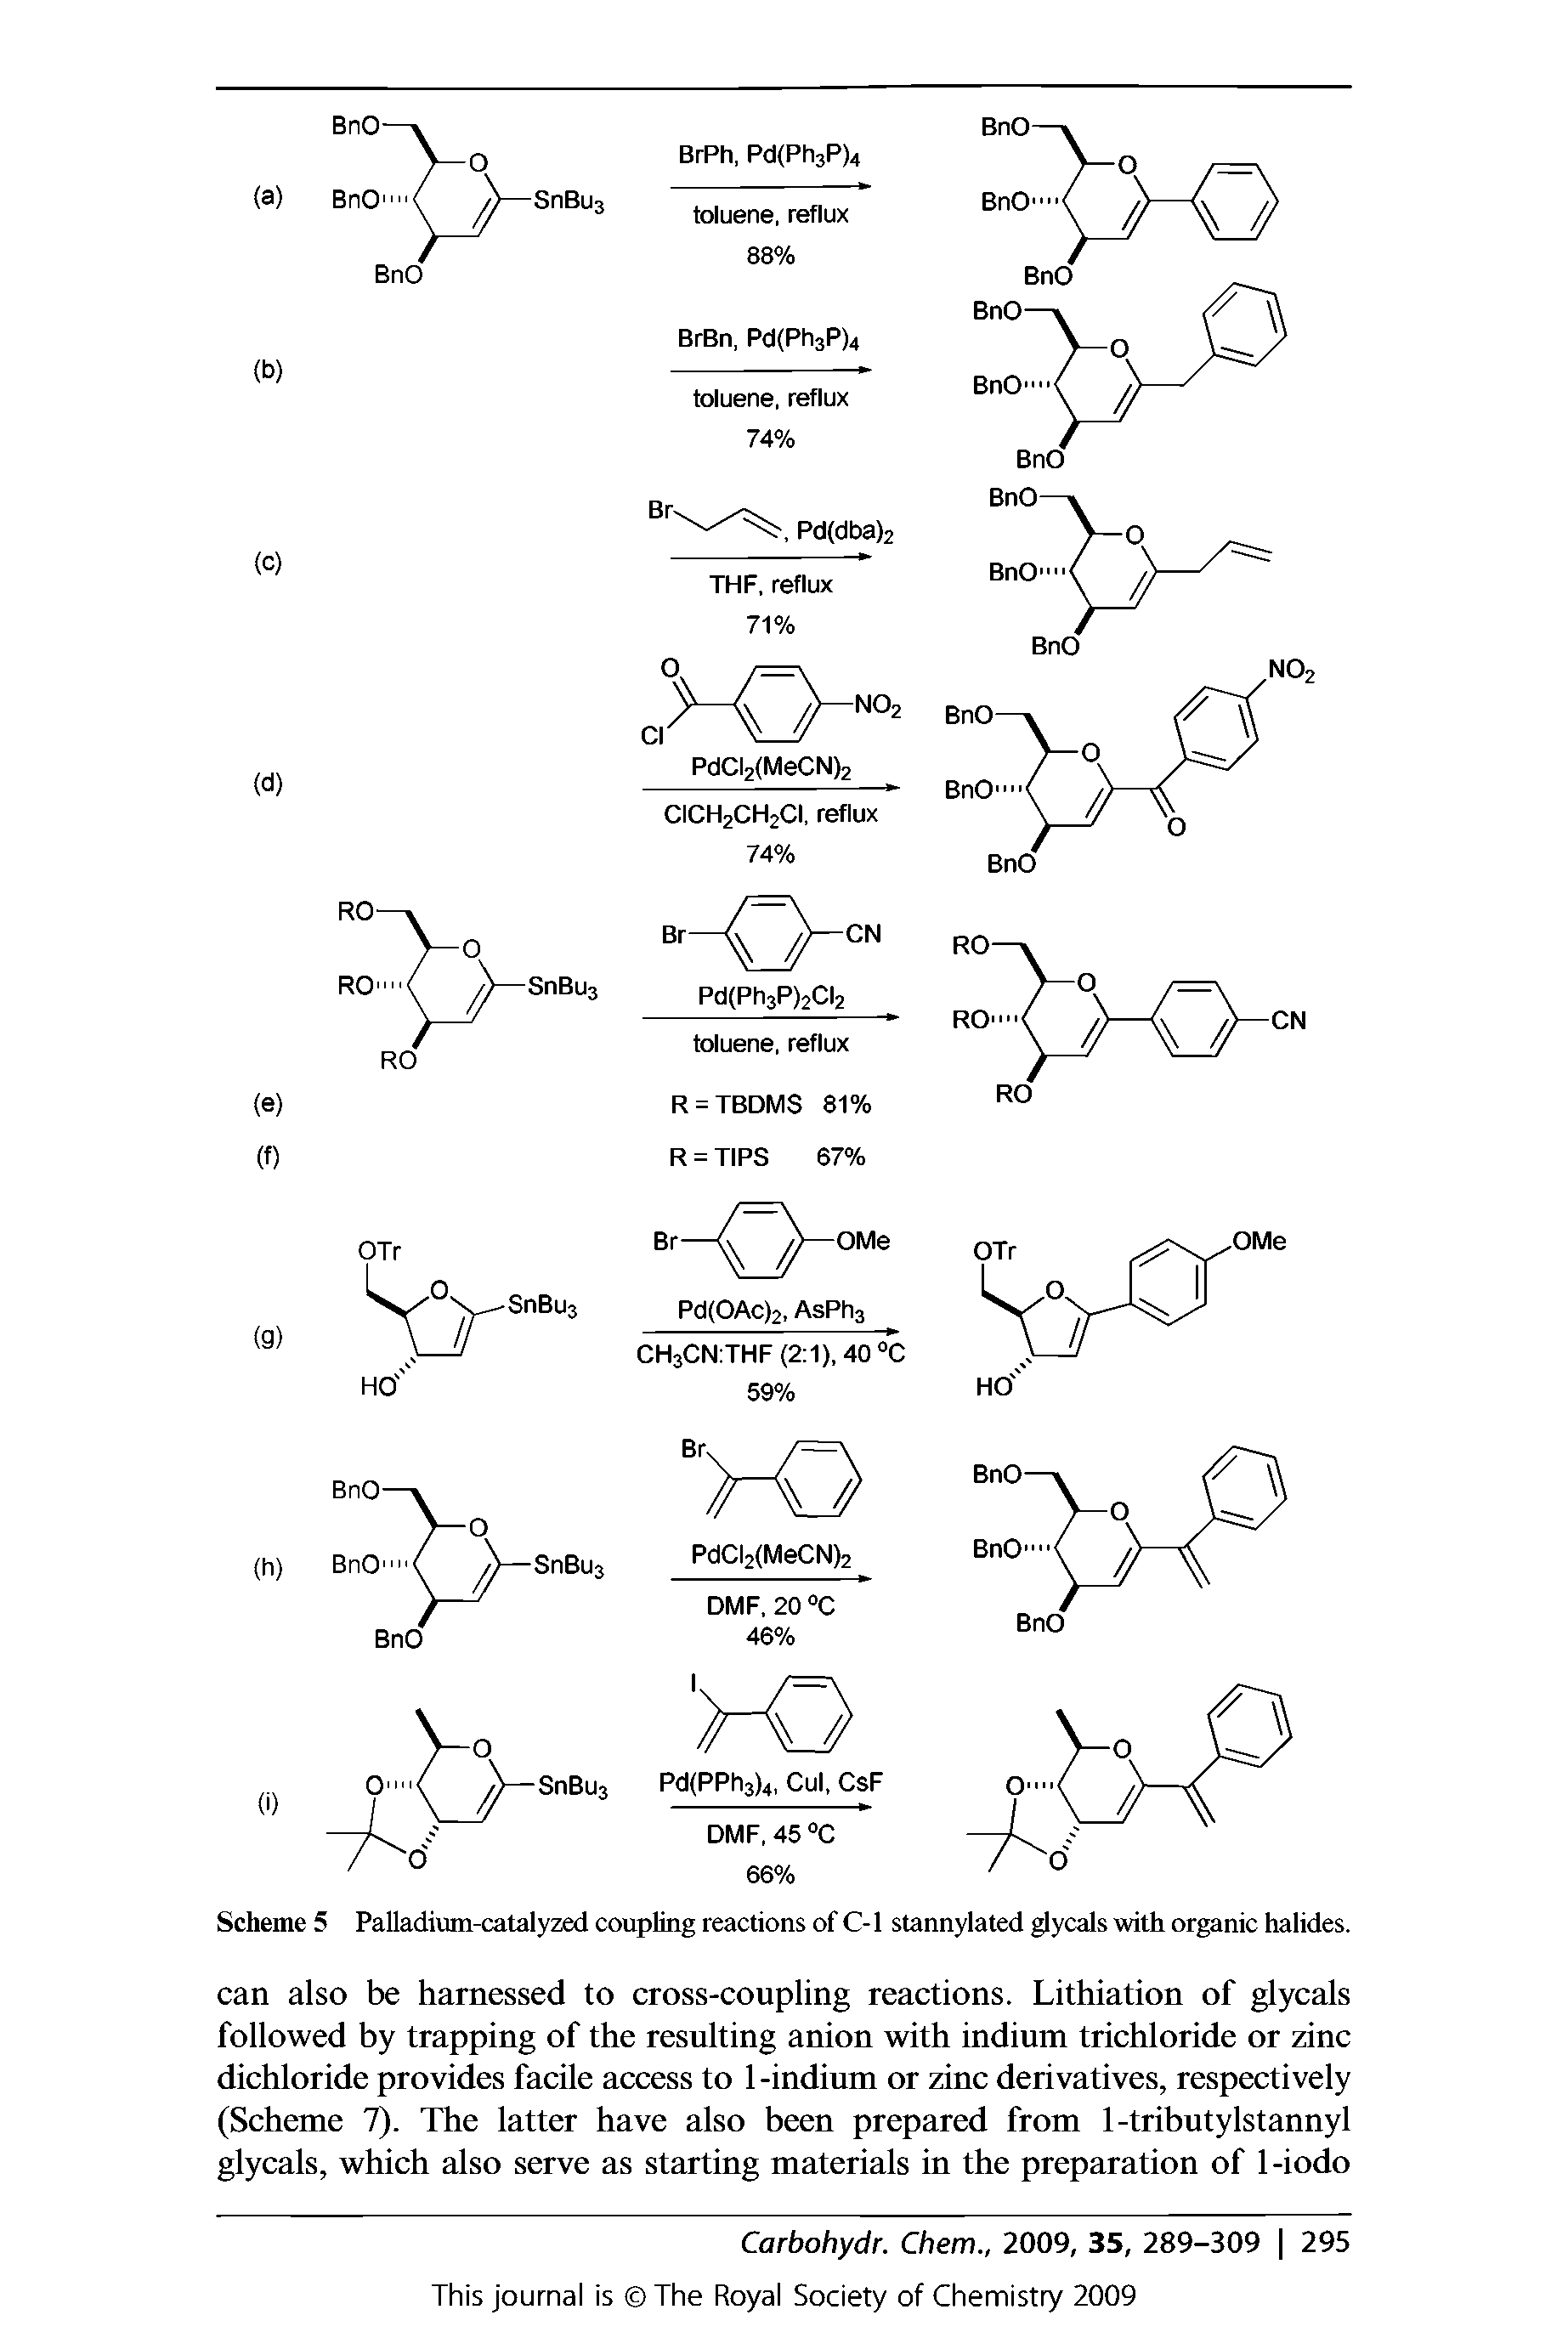 Scheme 5 Palladium-catalyzed coupling reactions of C-l stannylated glycals with organic halides.